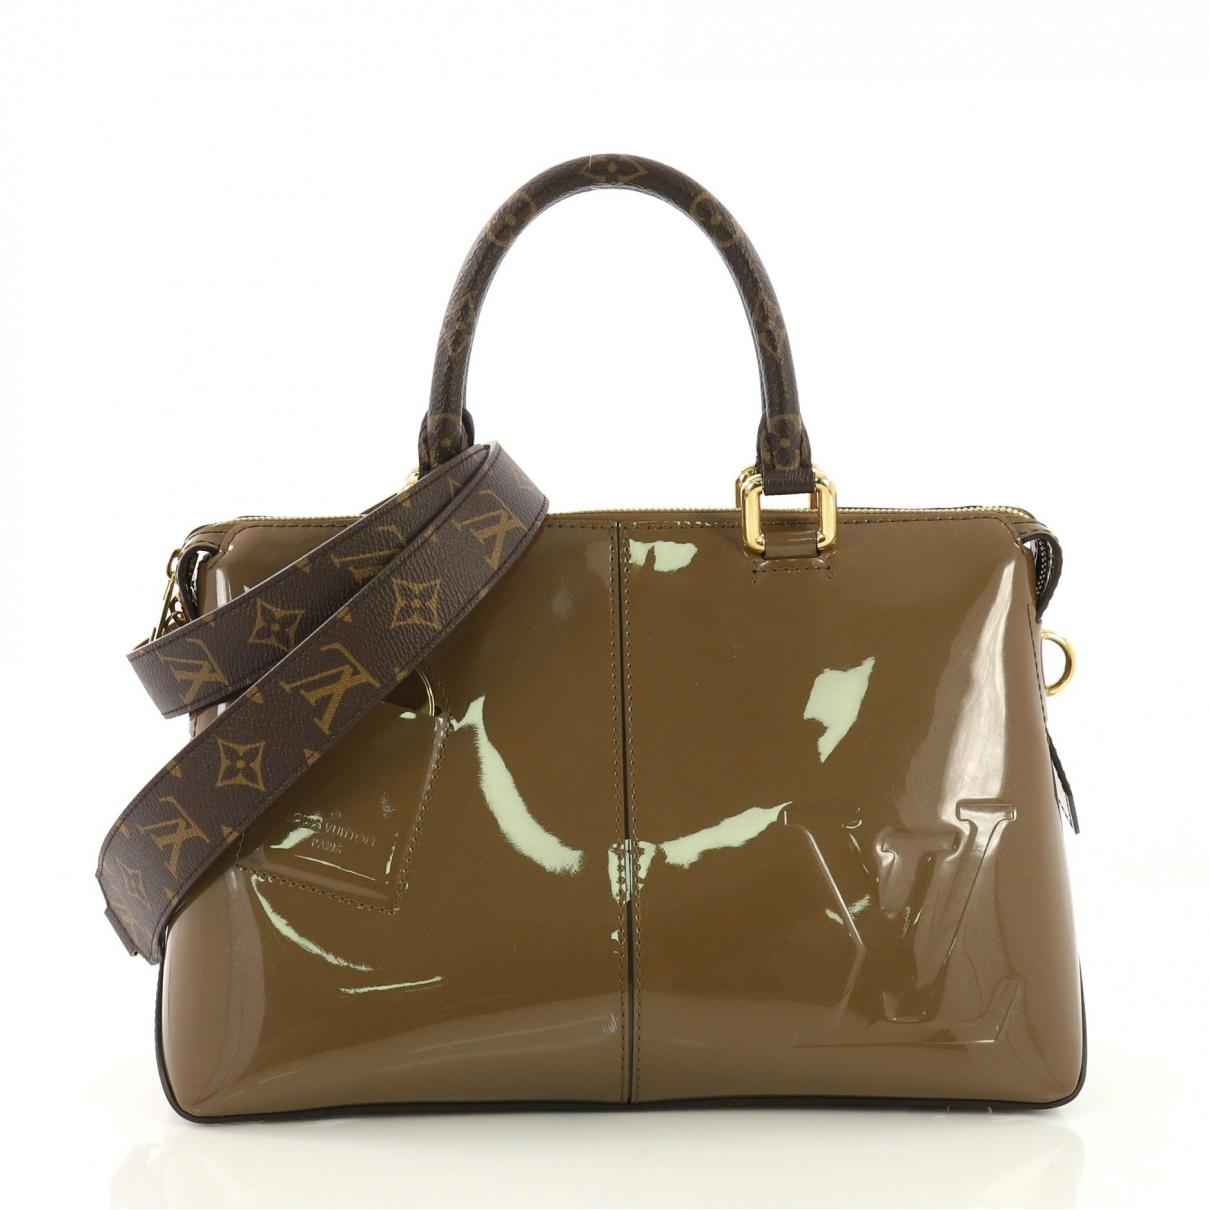 Lyst - Louis Vuitton Brown Patent Leather Handbag in Brown